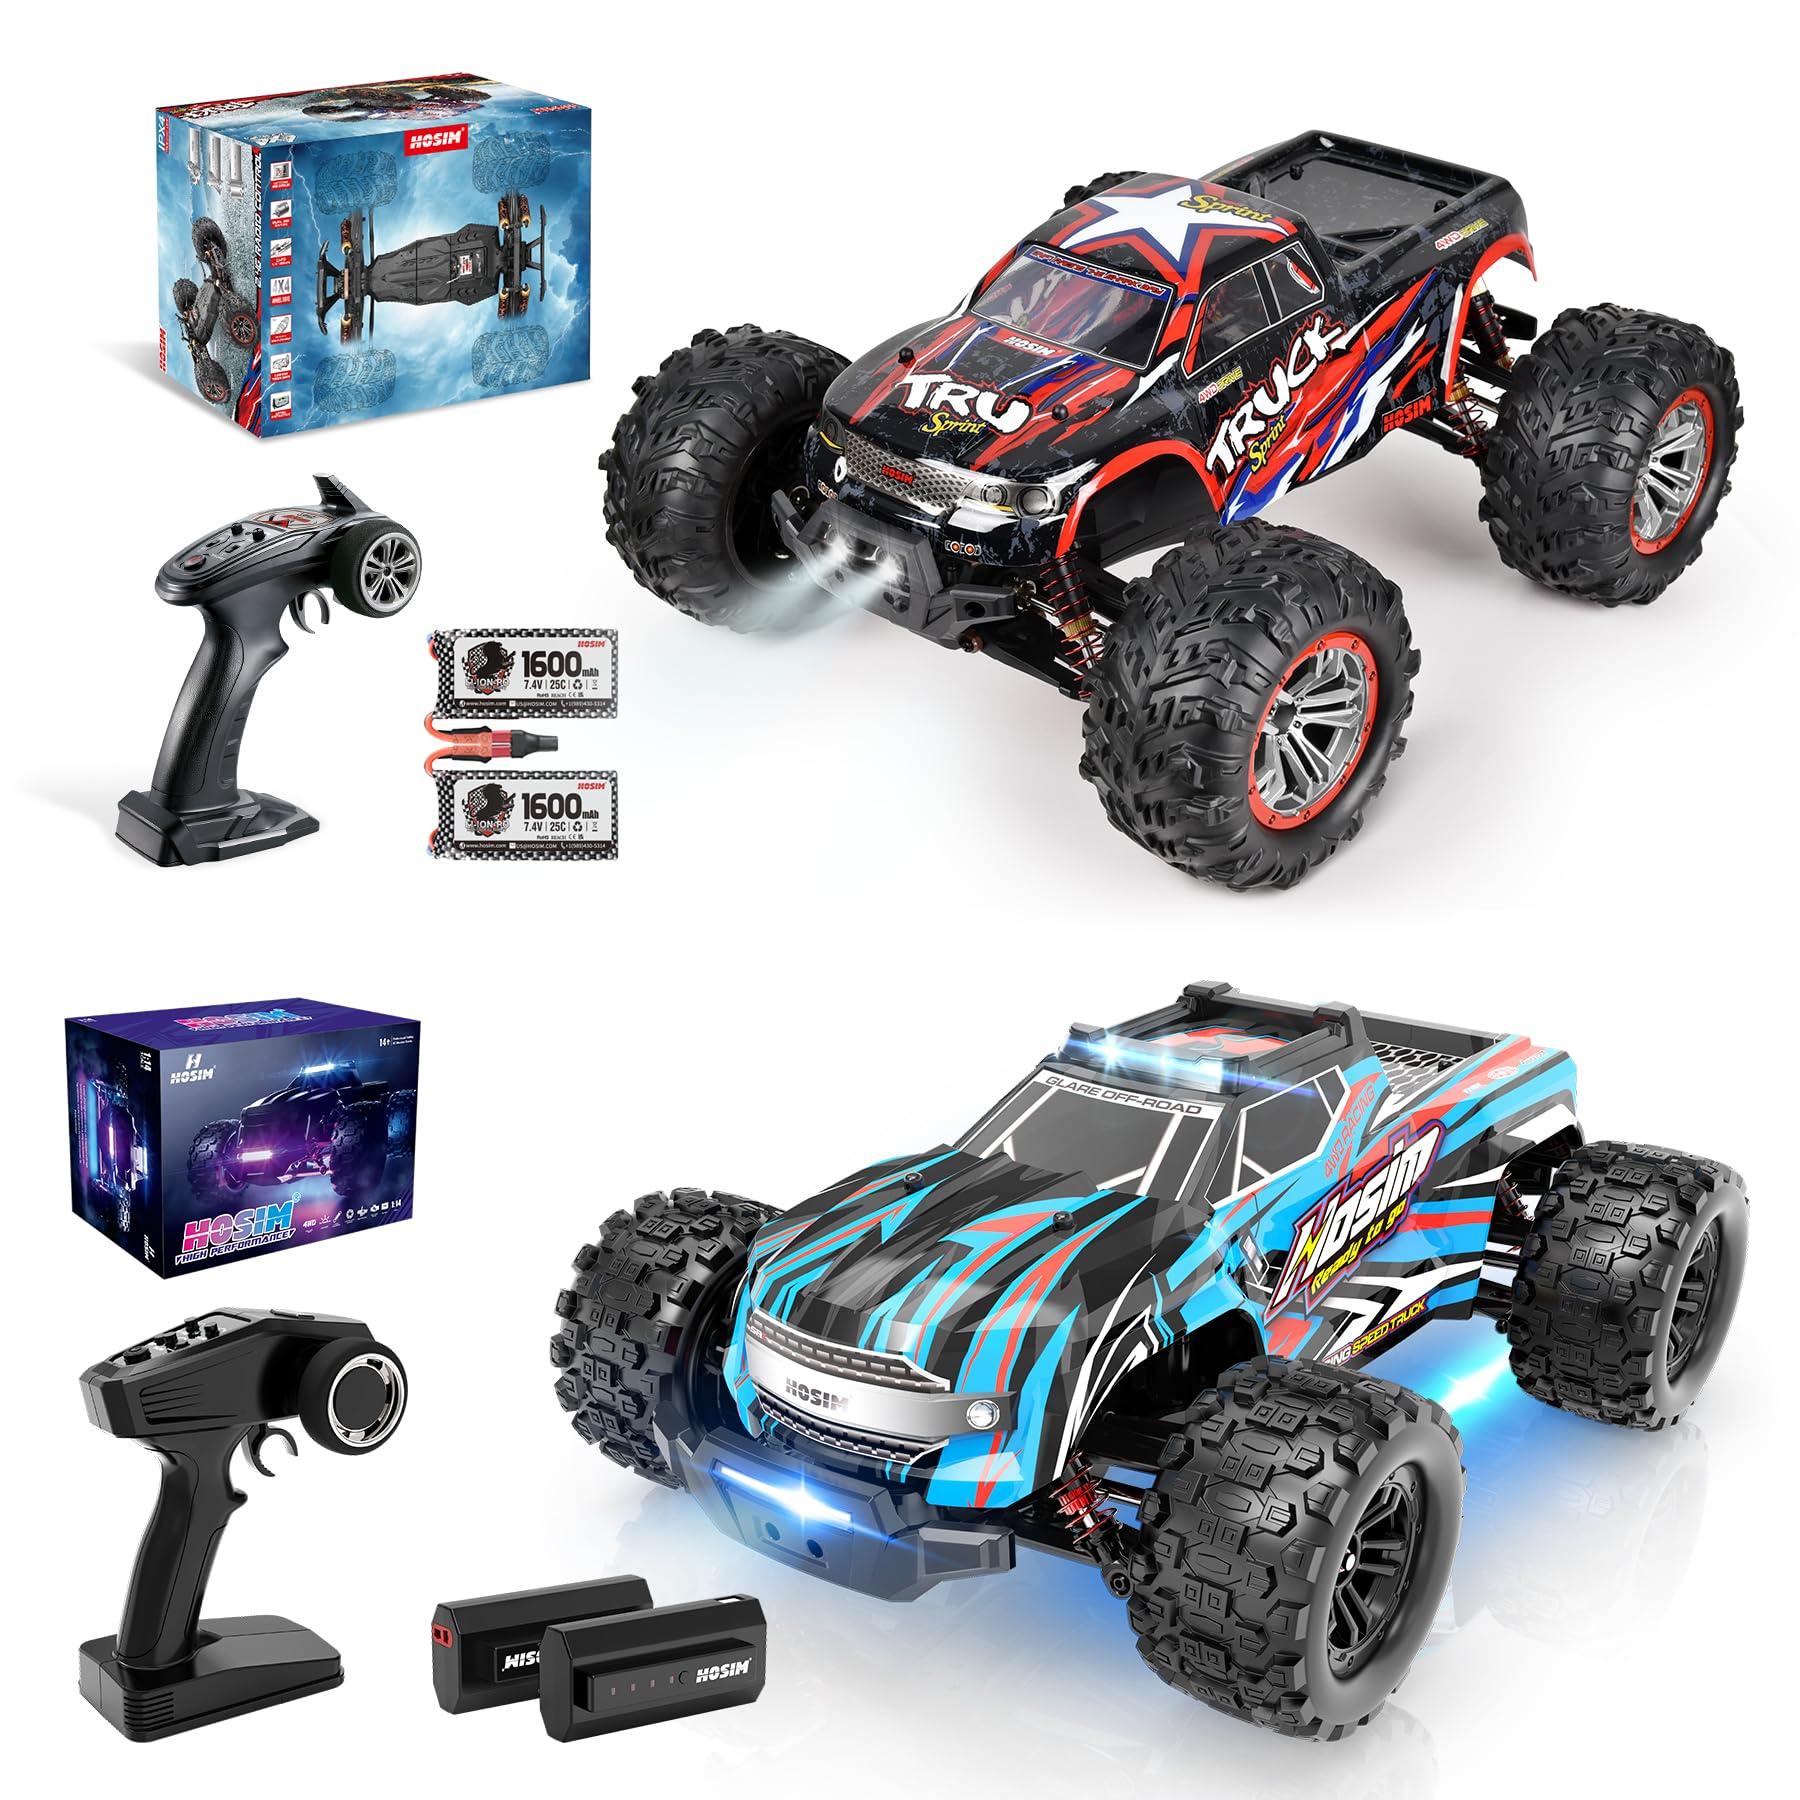 Electric Rc Trucks For Adults:  Monster trucks.